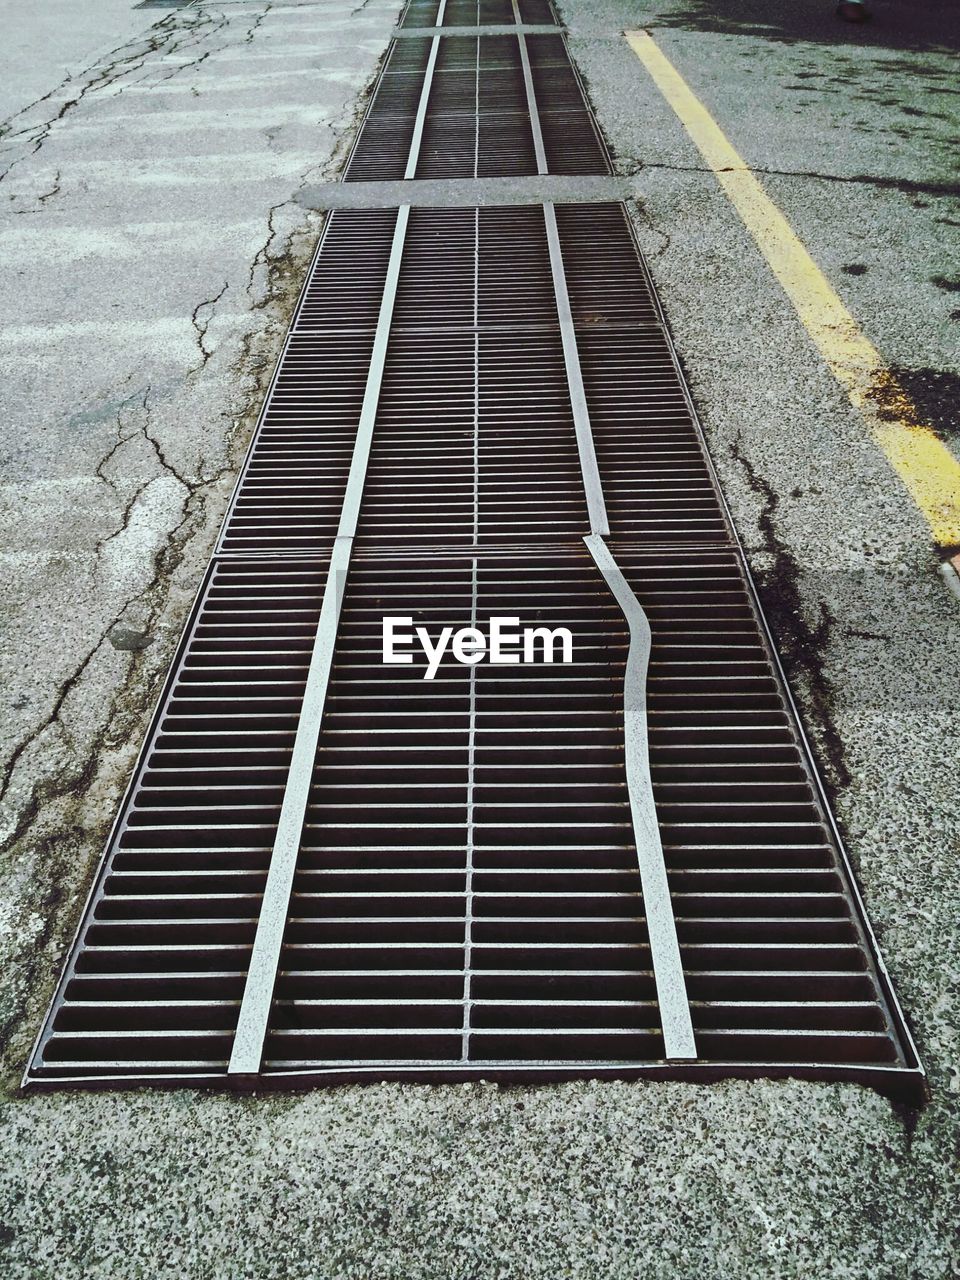 High angle view of sewer amidst street